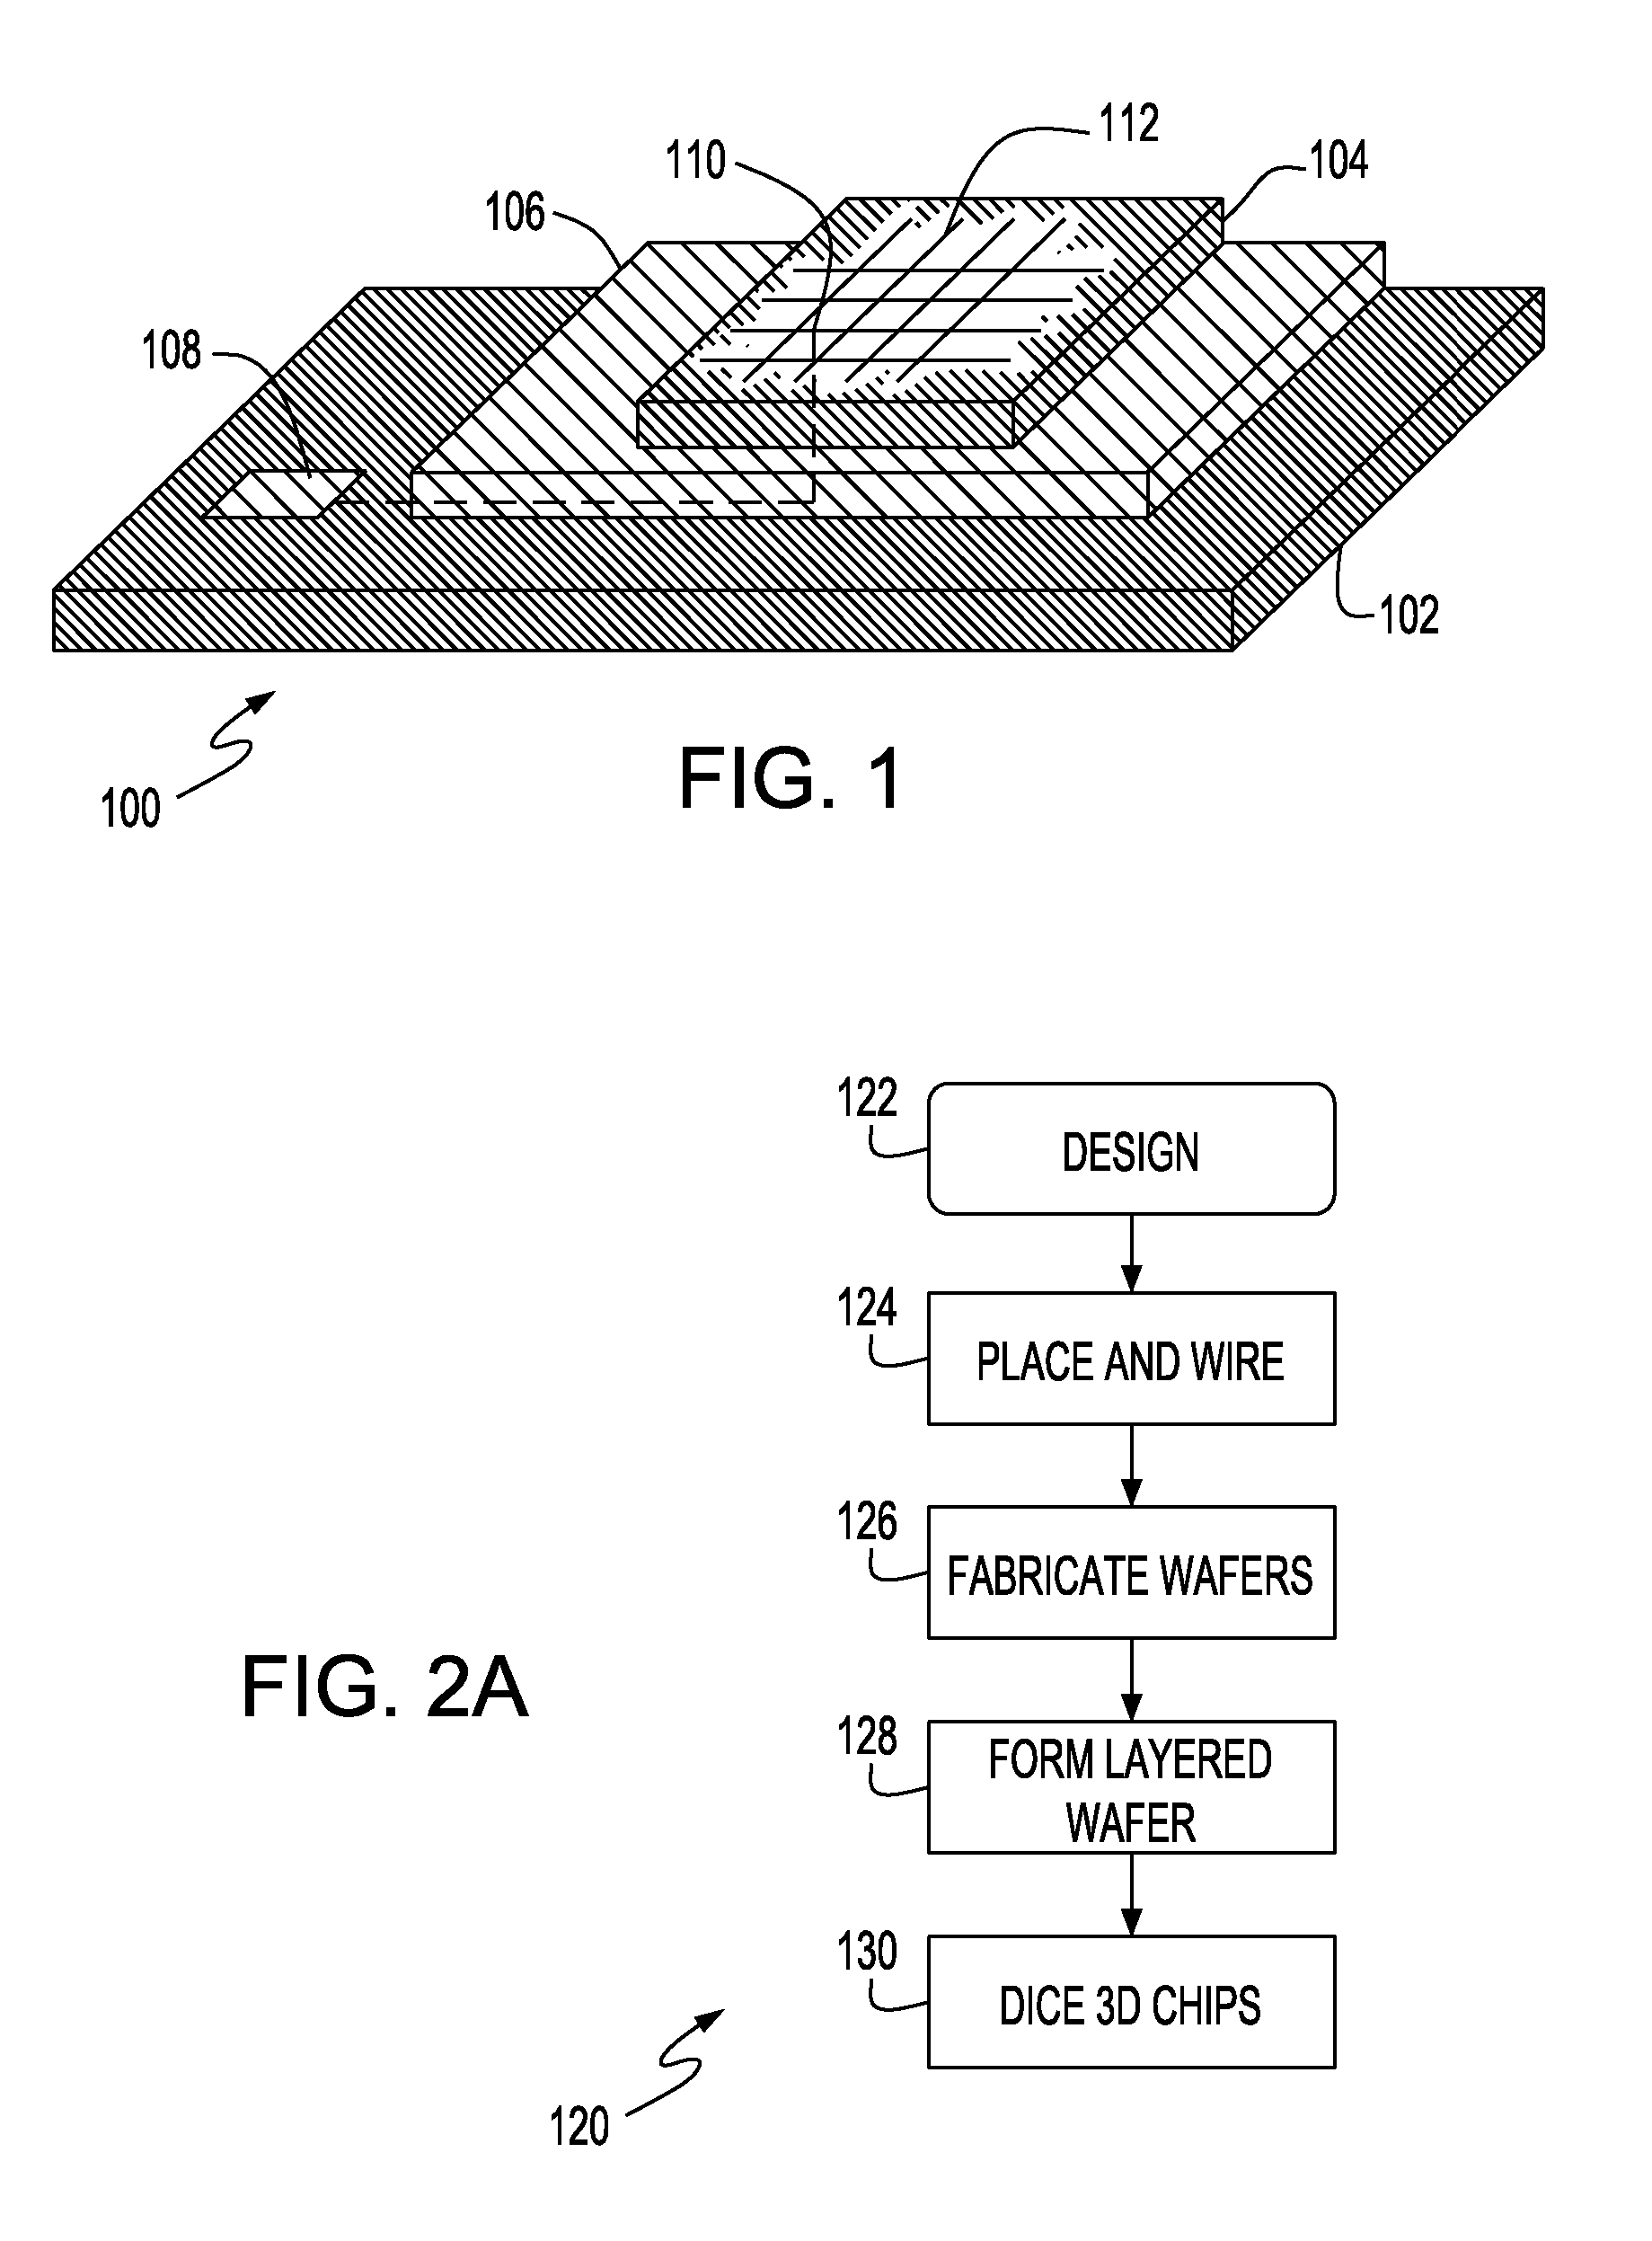 Three dimensional integrated circuit and method of design